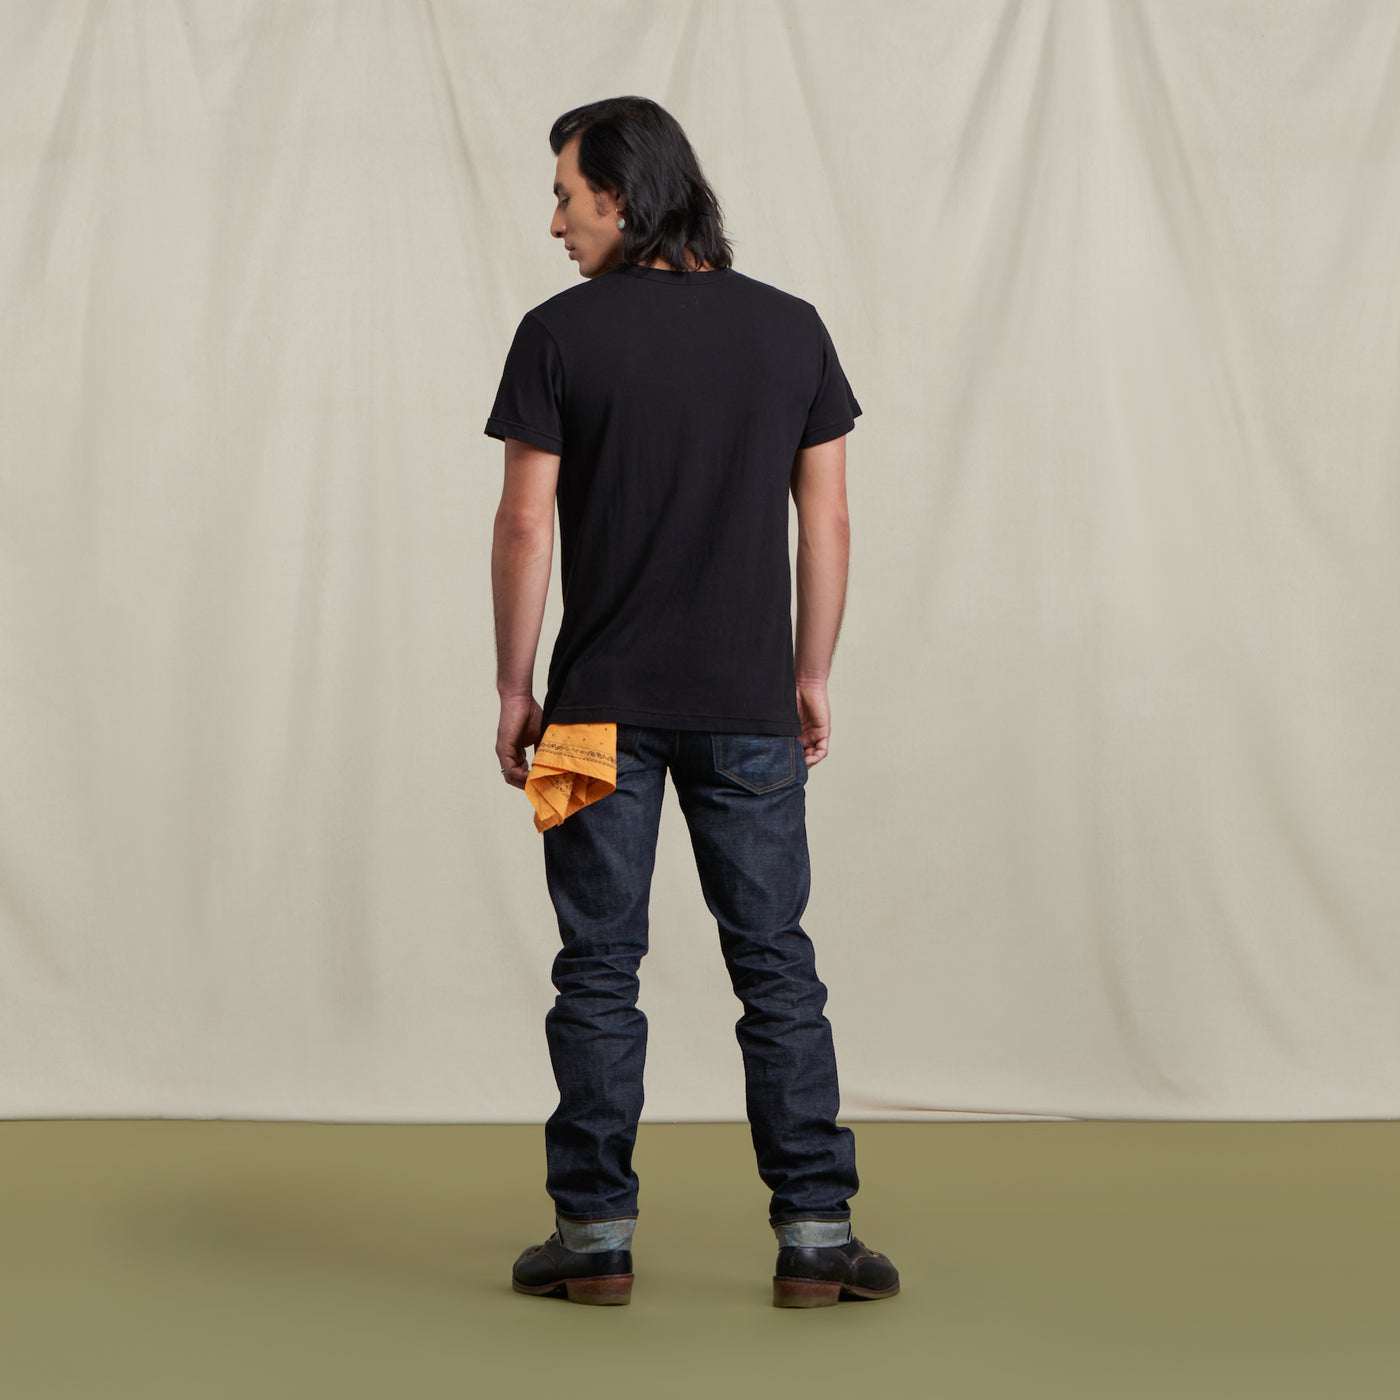 The picture is of a male model turned to the back wearing the Crew Tee Jet Black with jeans and brown boots. He is posed in front of a neutral background. He has a yellow bandana in his back pocket.